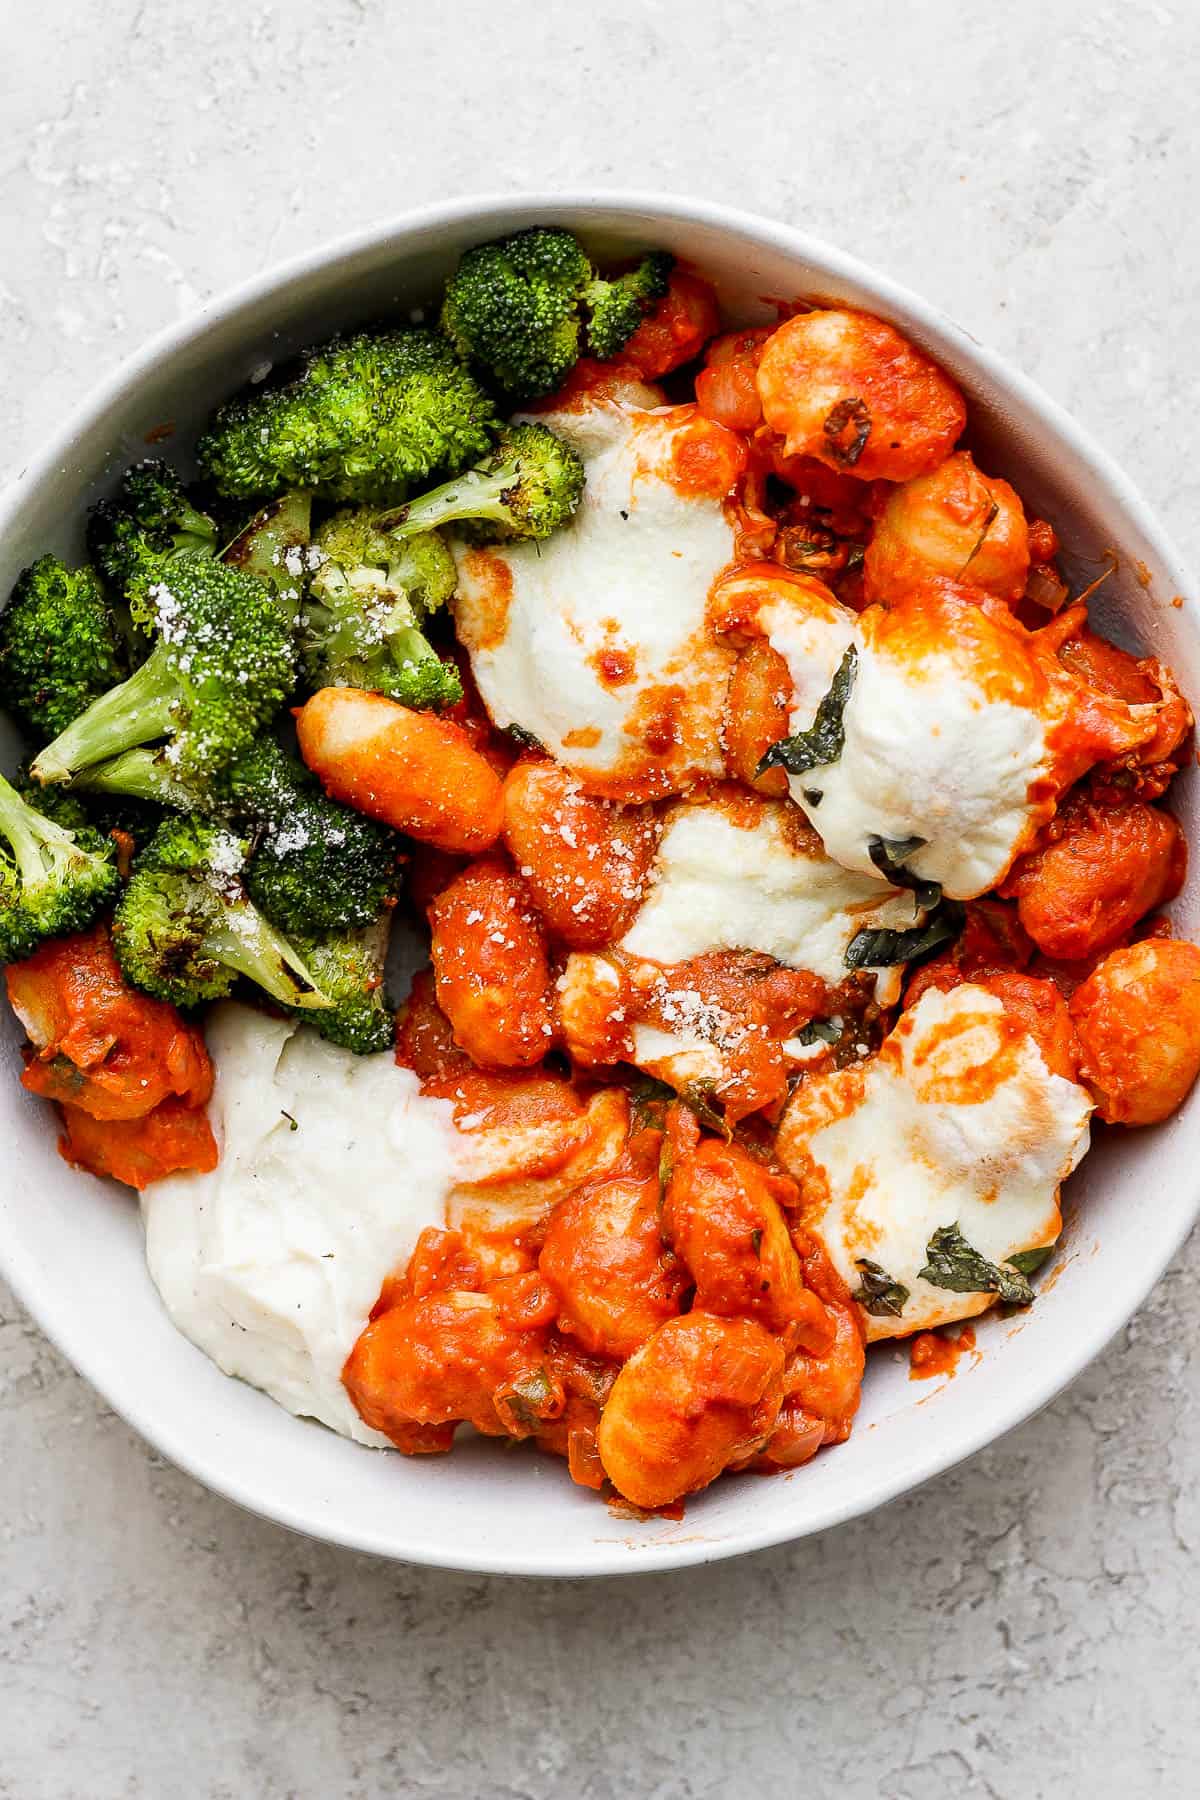 A bowl of baked gnocchi with a side of grilled broccoli.